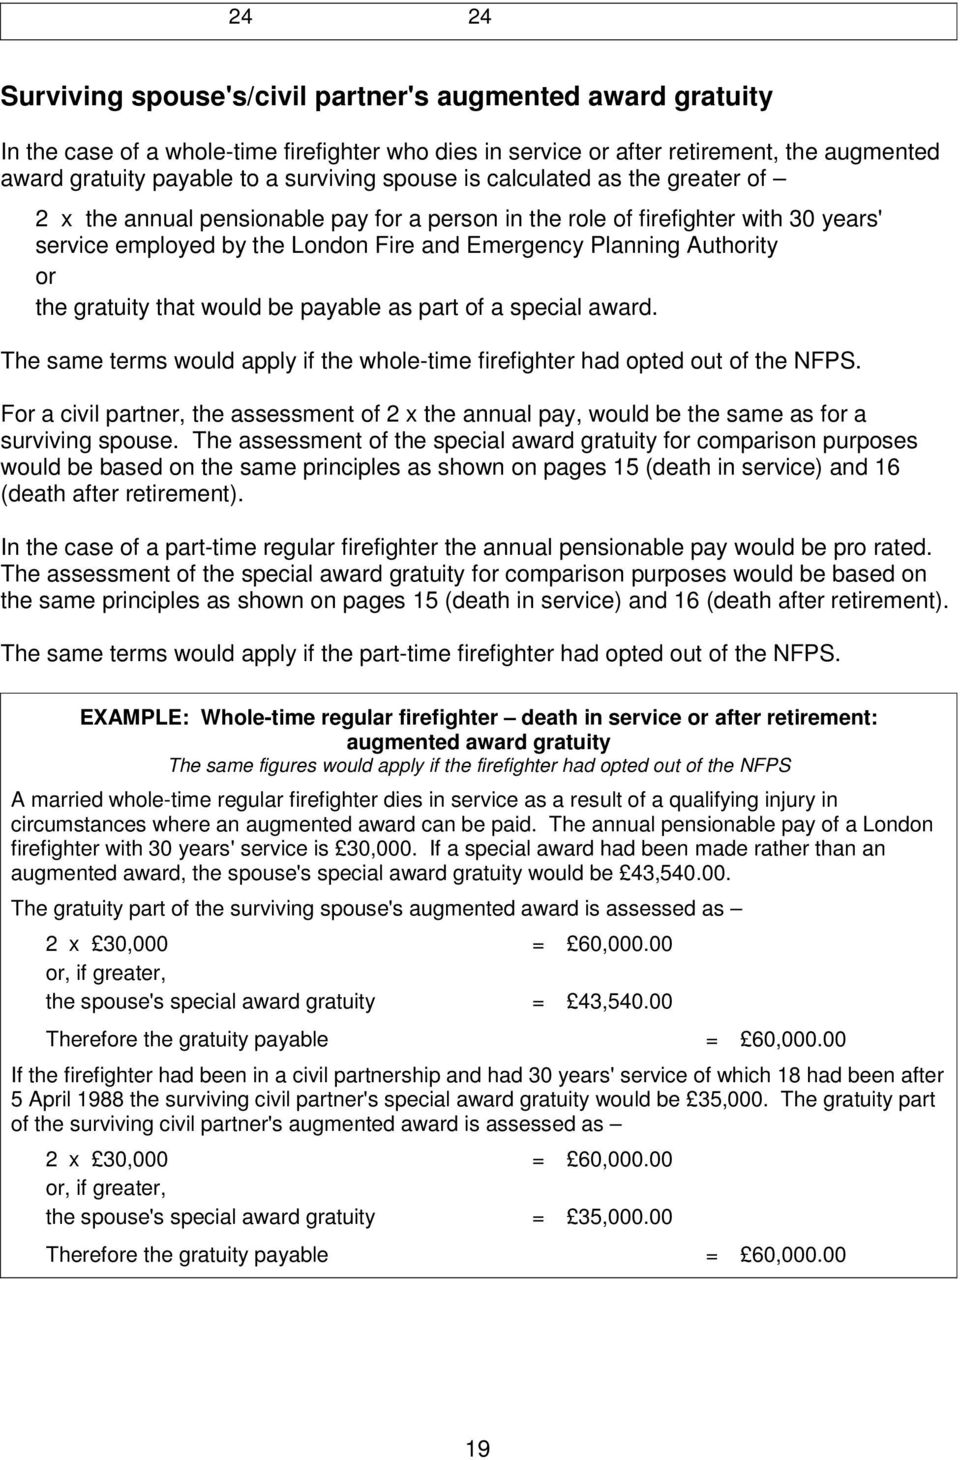 the gratuity that would be payable as part of a special award. The same terms would apply if the whole-time firefighter had opted out of the NFPS.